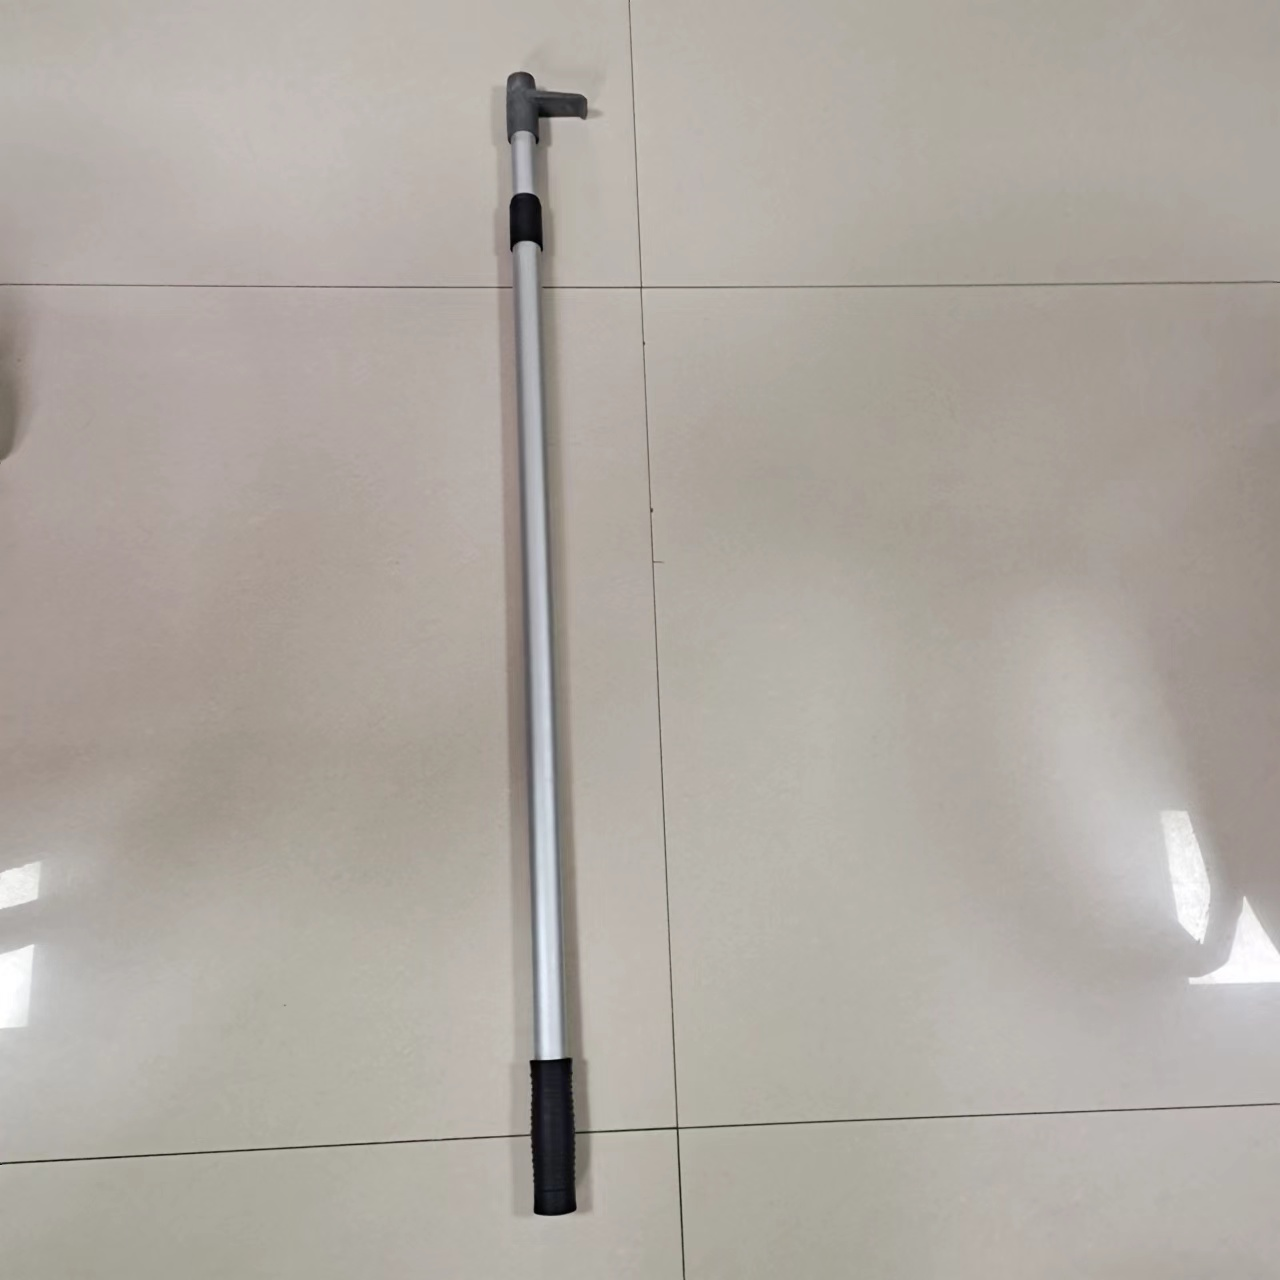 China shutter extended rod supplier,shutter extended rod to open and close high place louver,handheld shutter extended rod